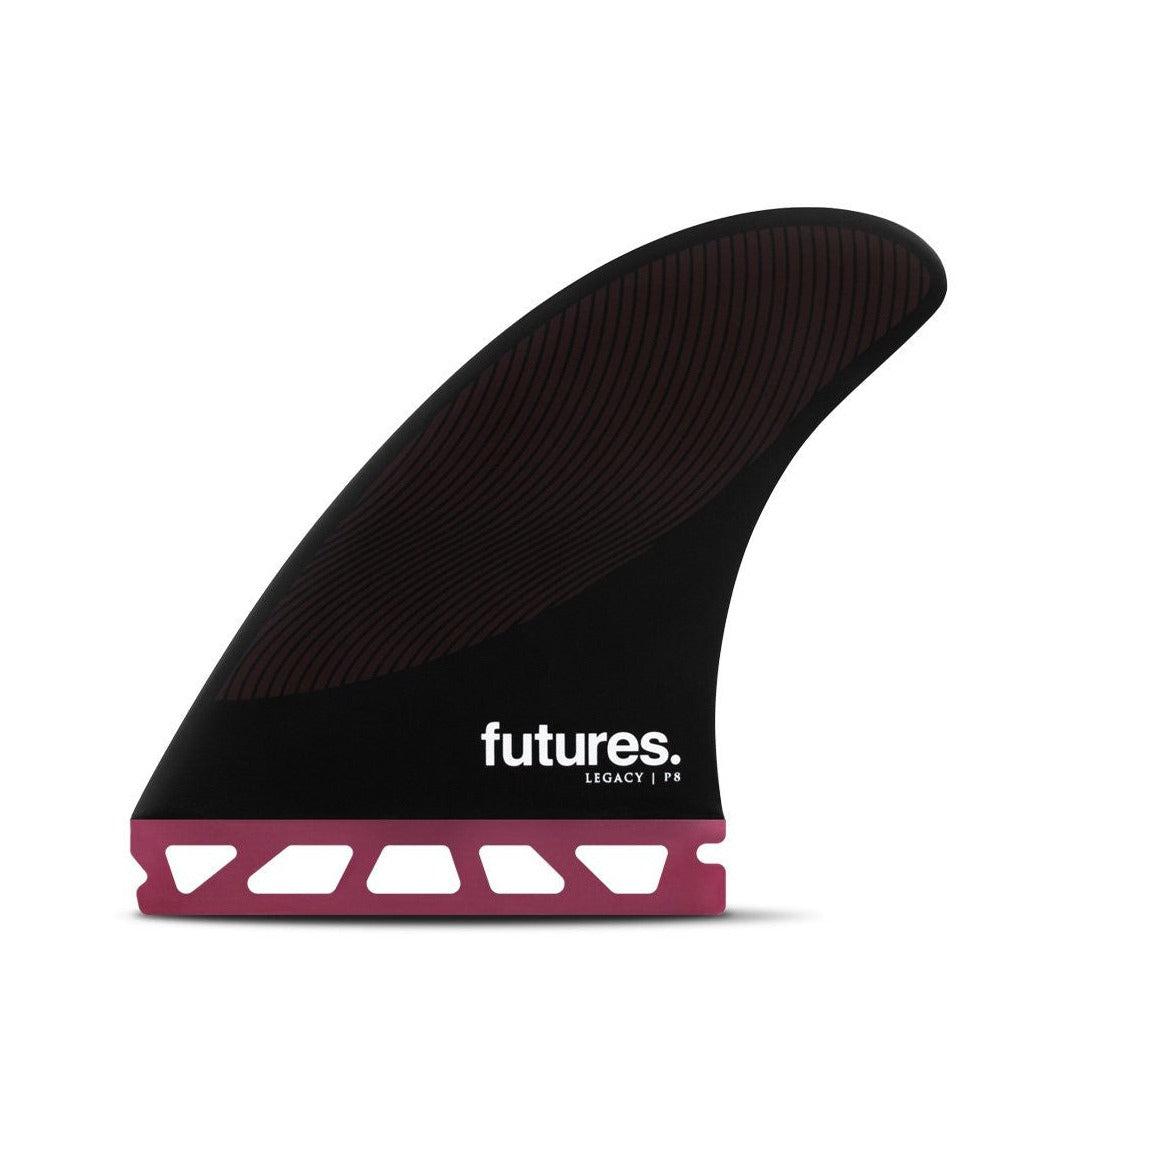 futures-P8-legacy-thruster-surfboard-fin